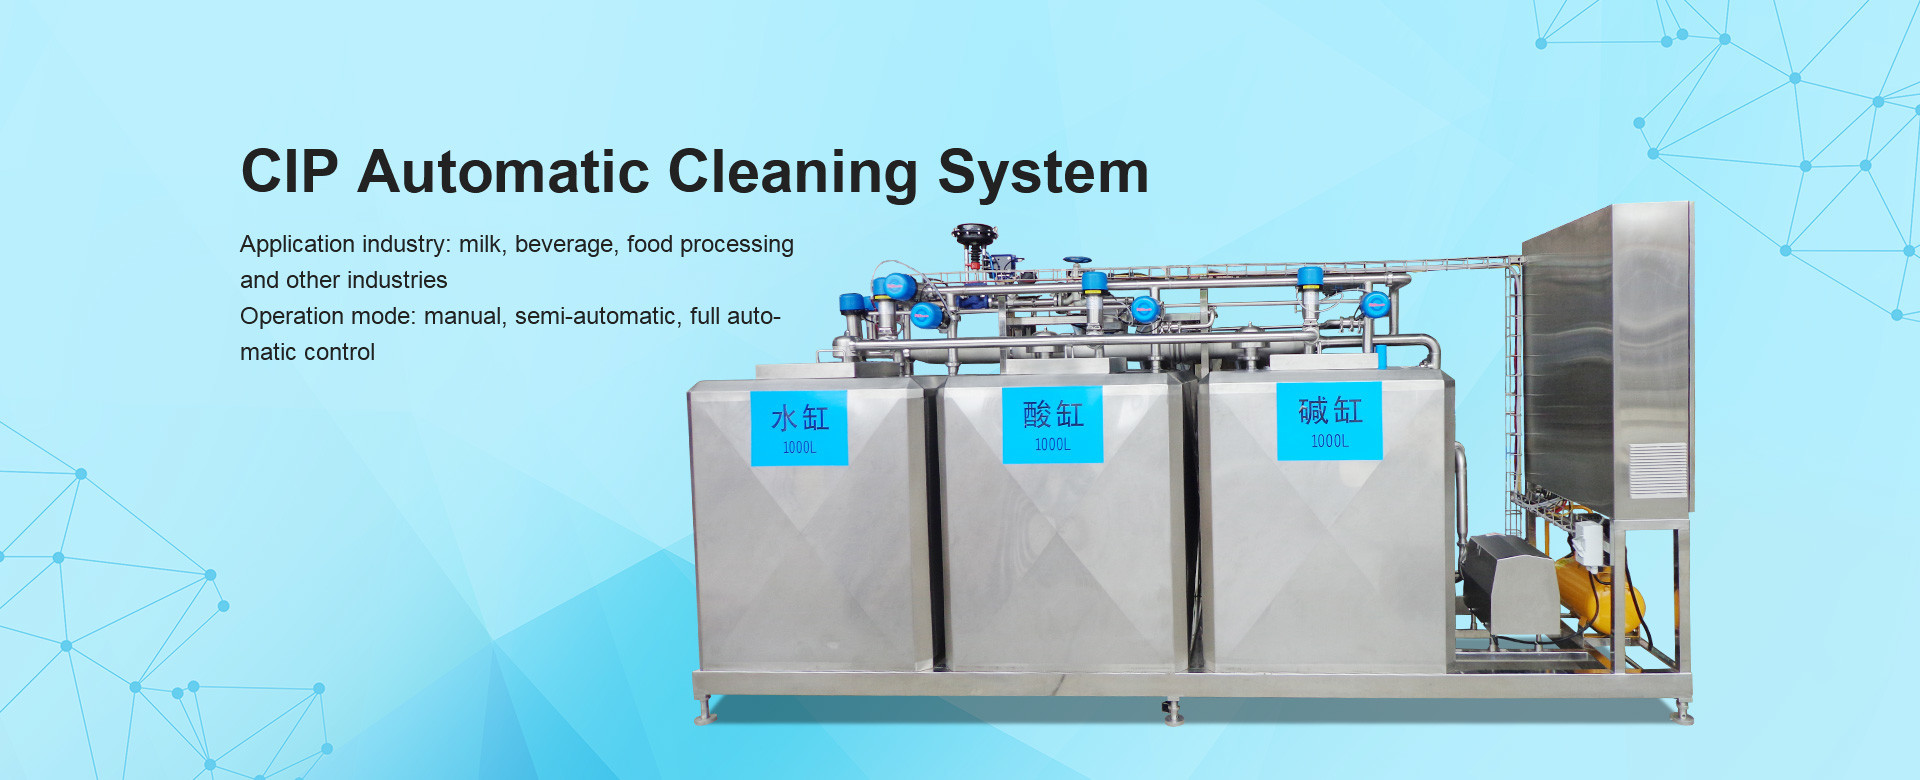 CIP Automatic Cleaning System